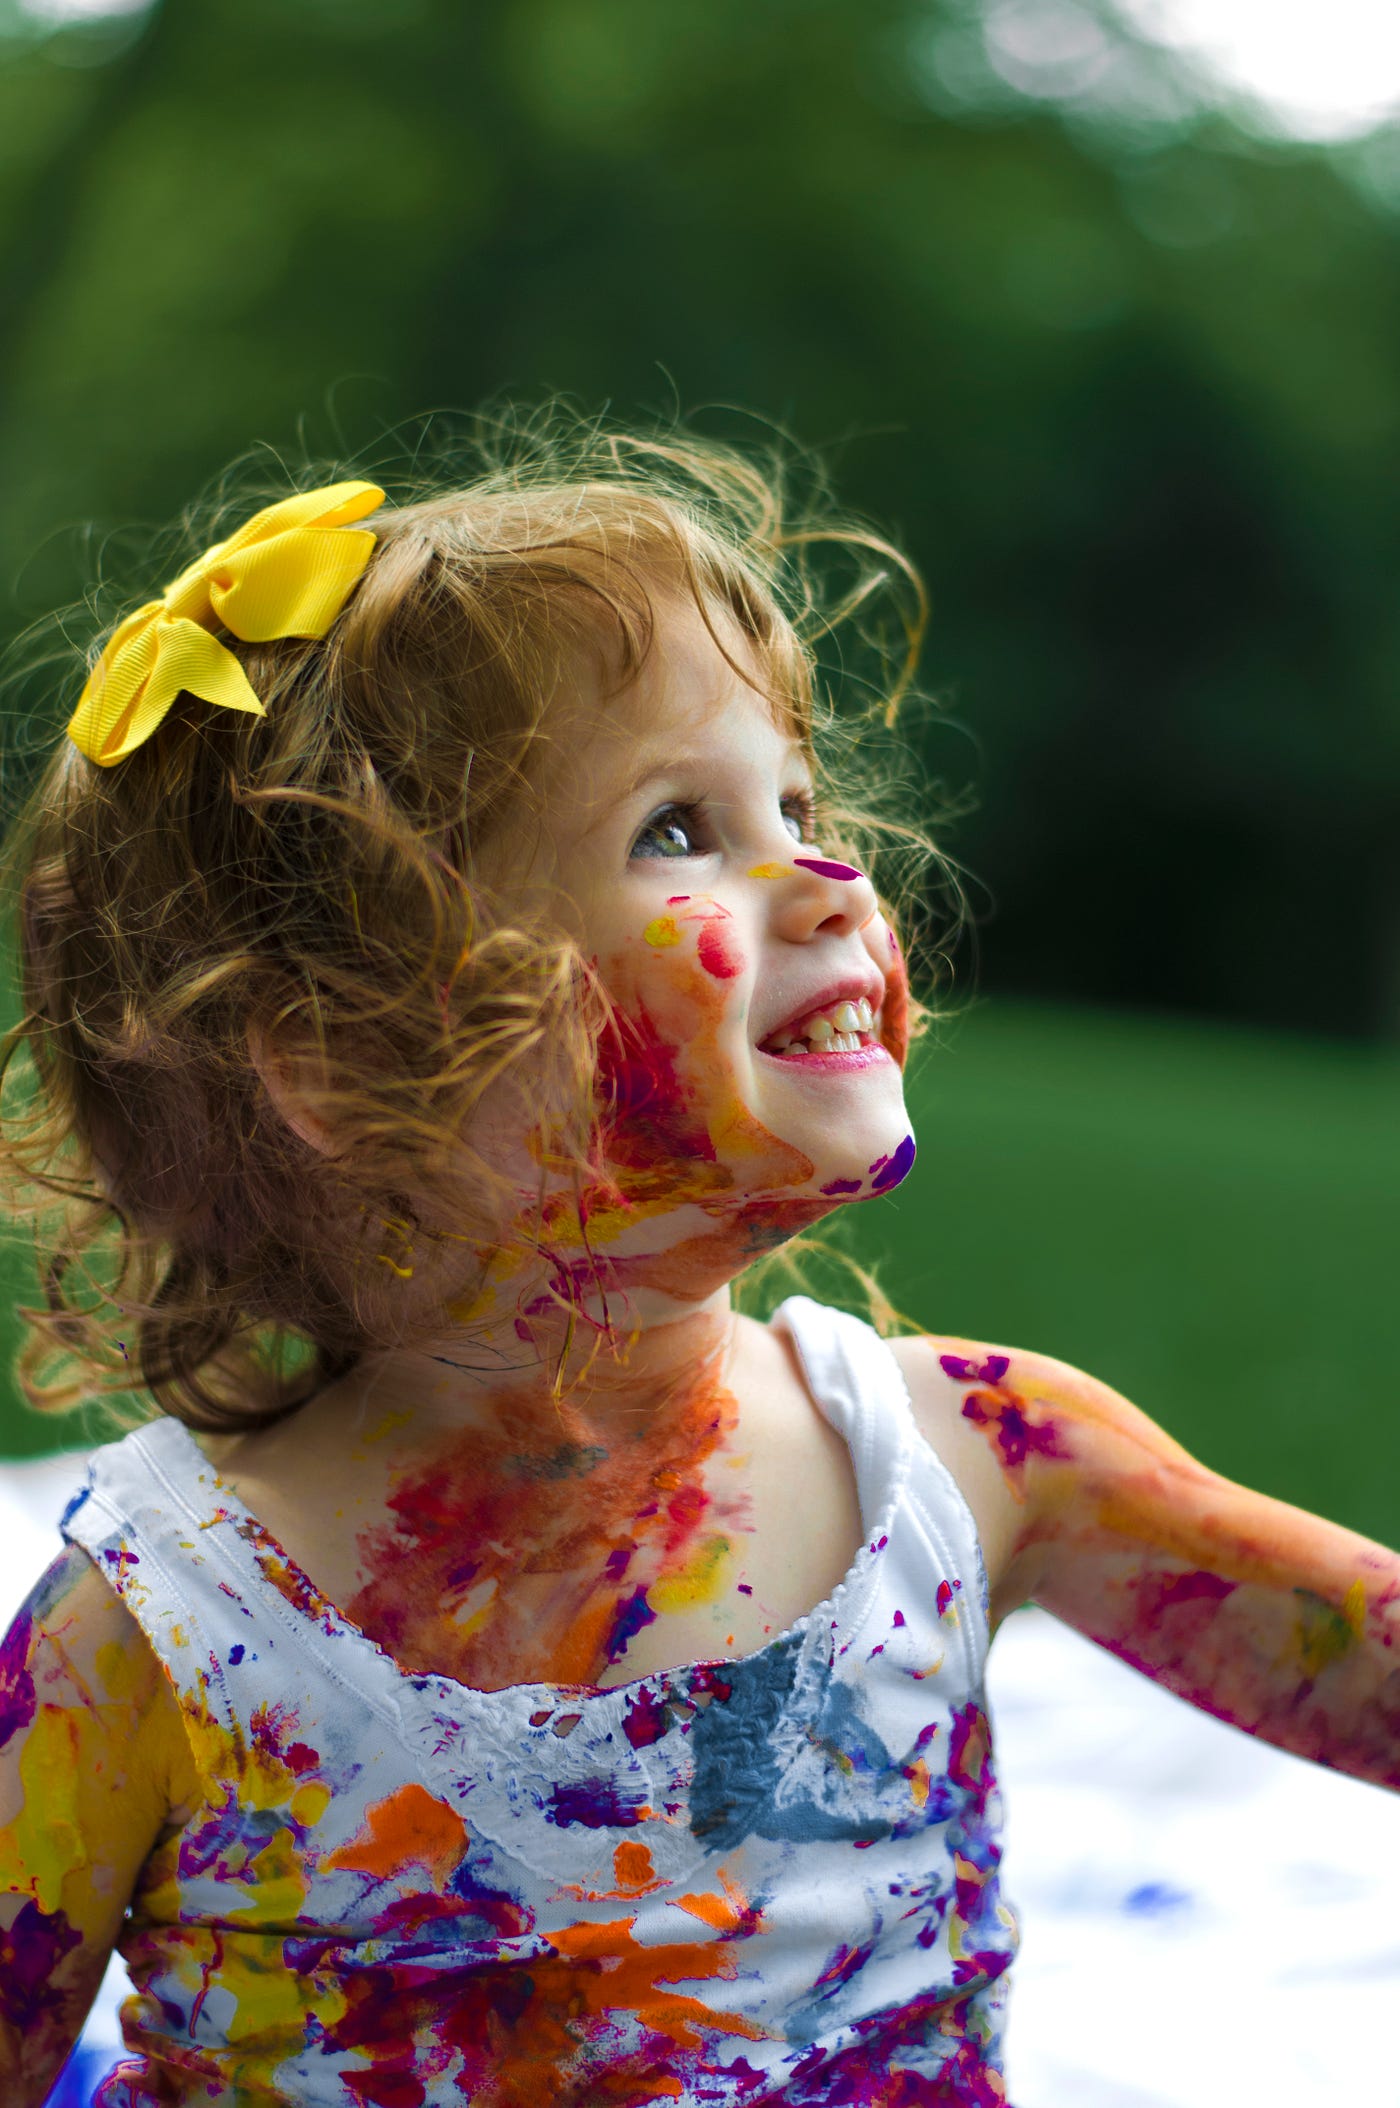 White child, around age 2 or 3, smiles as she gazes upward. She has curly reddish hair, a yellow ribbon in her hair, and various colors of pain splashed onto her lower face and neck. We see her in profile as she faces to the right.